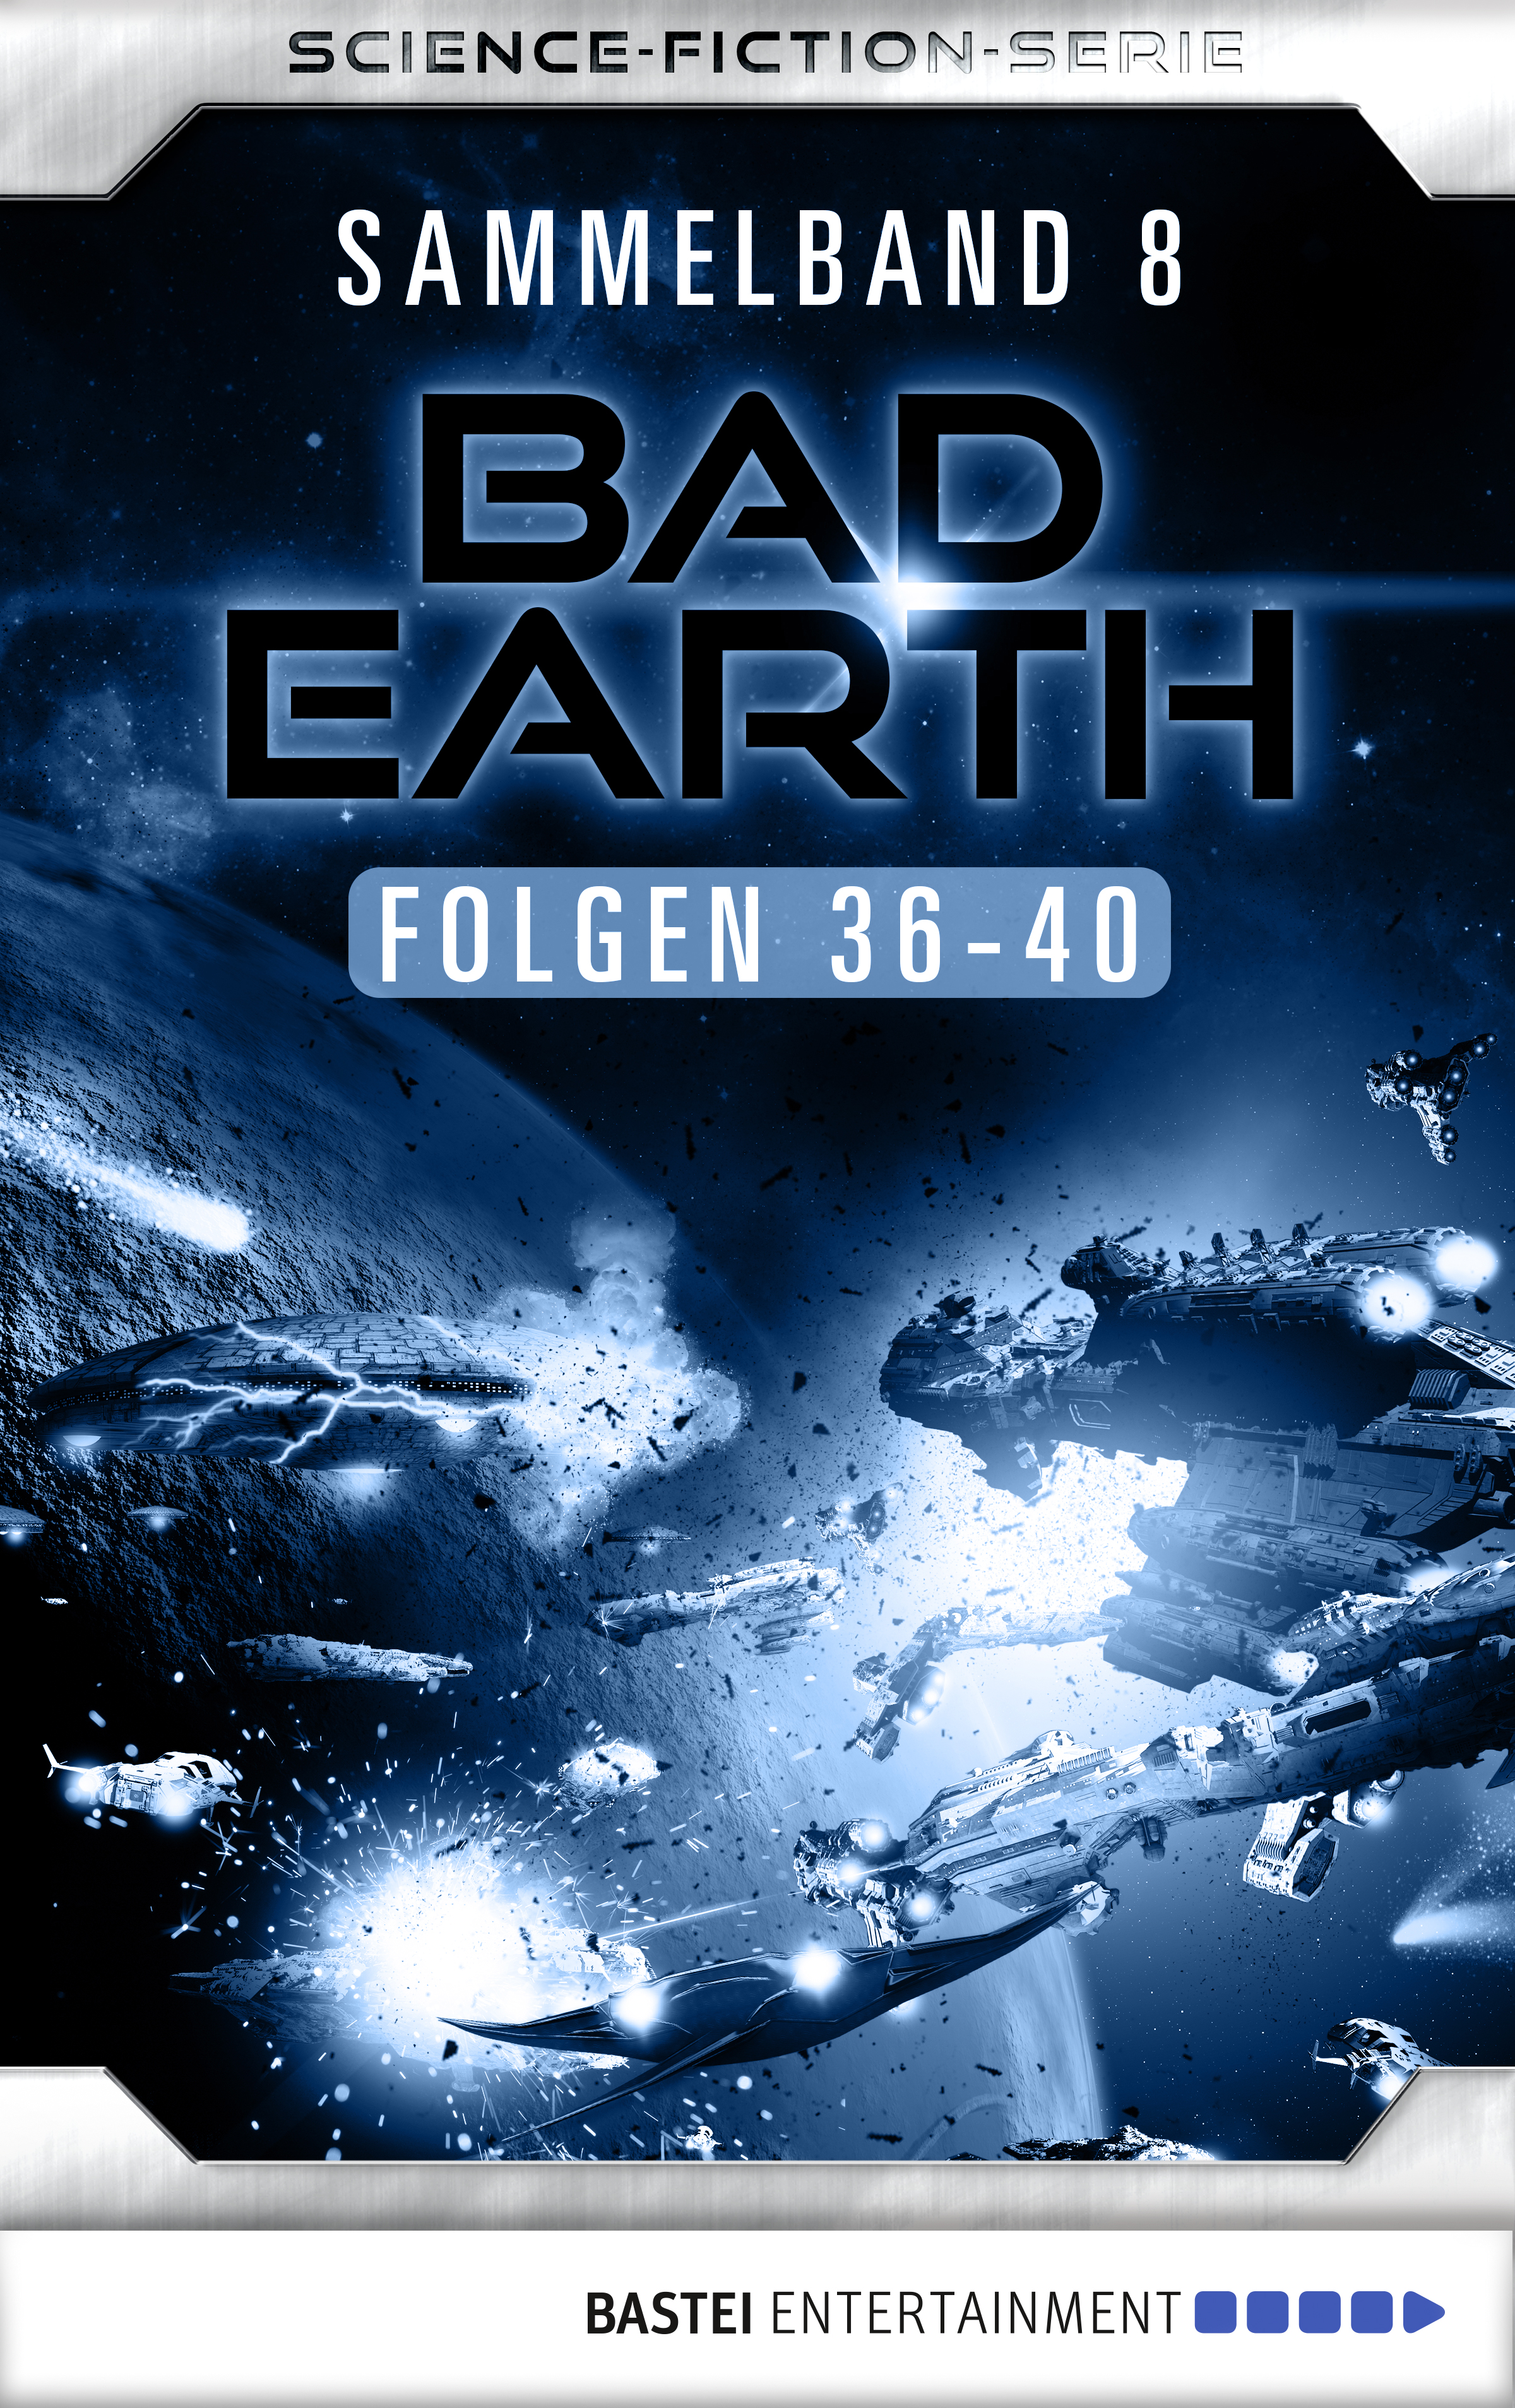 Bad Earth Sammelband 8 - Science-Fiction-Serie